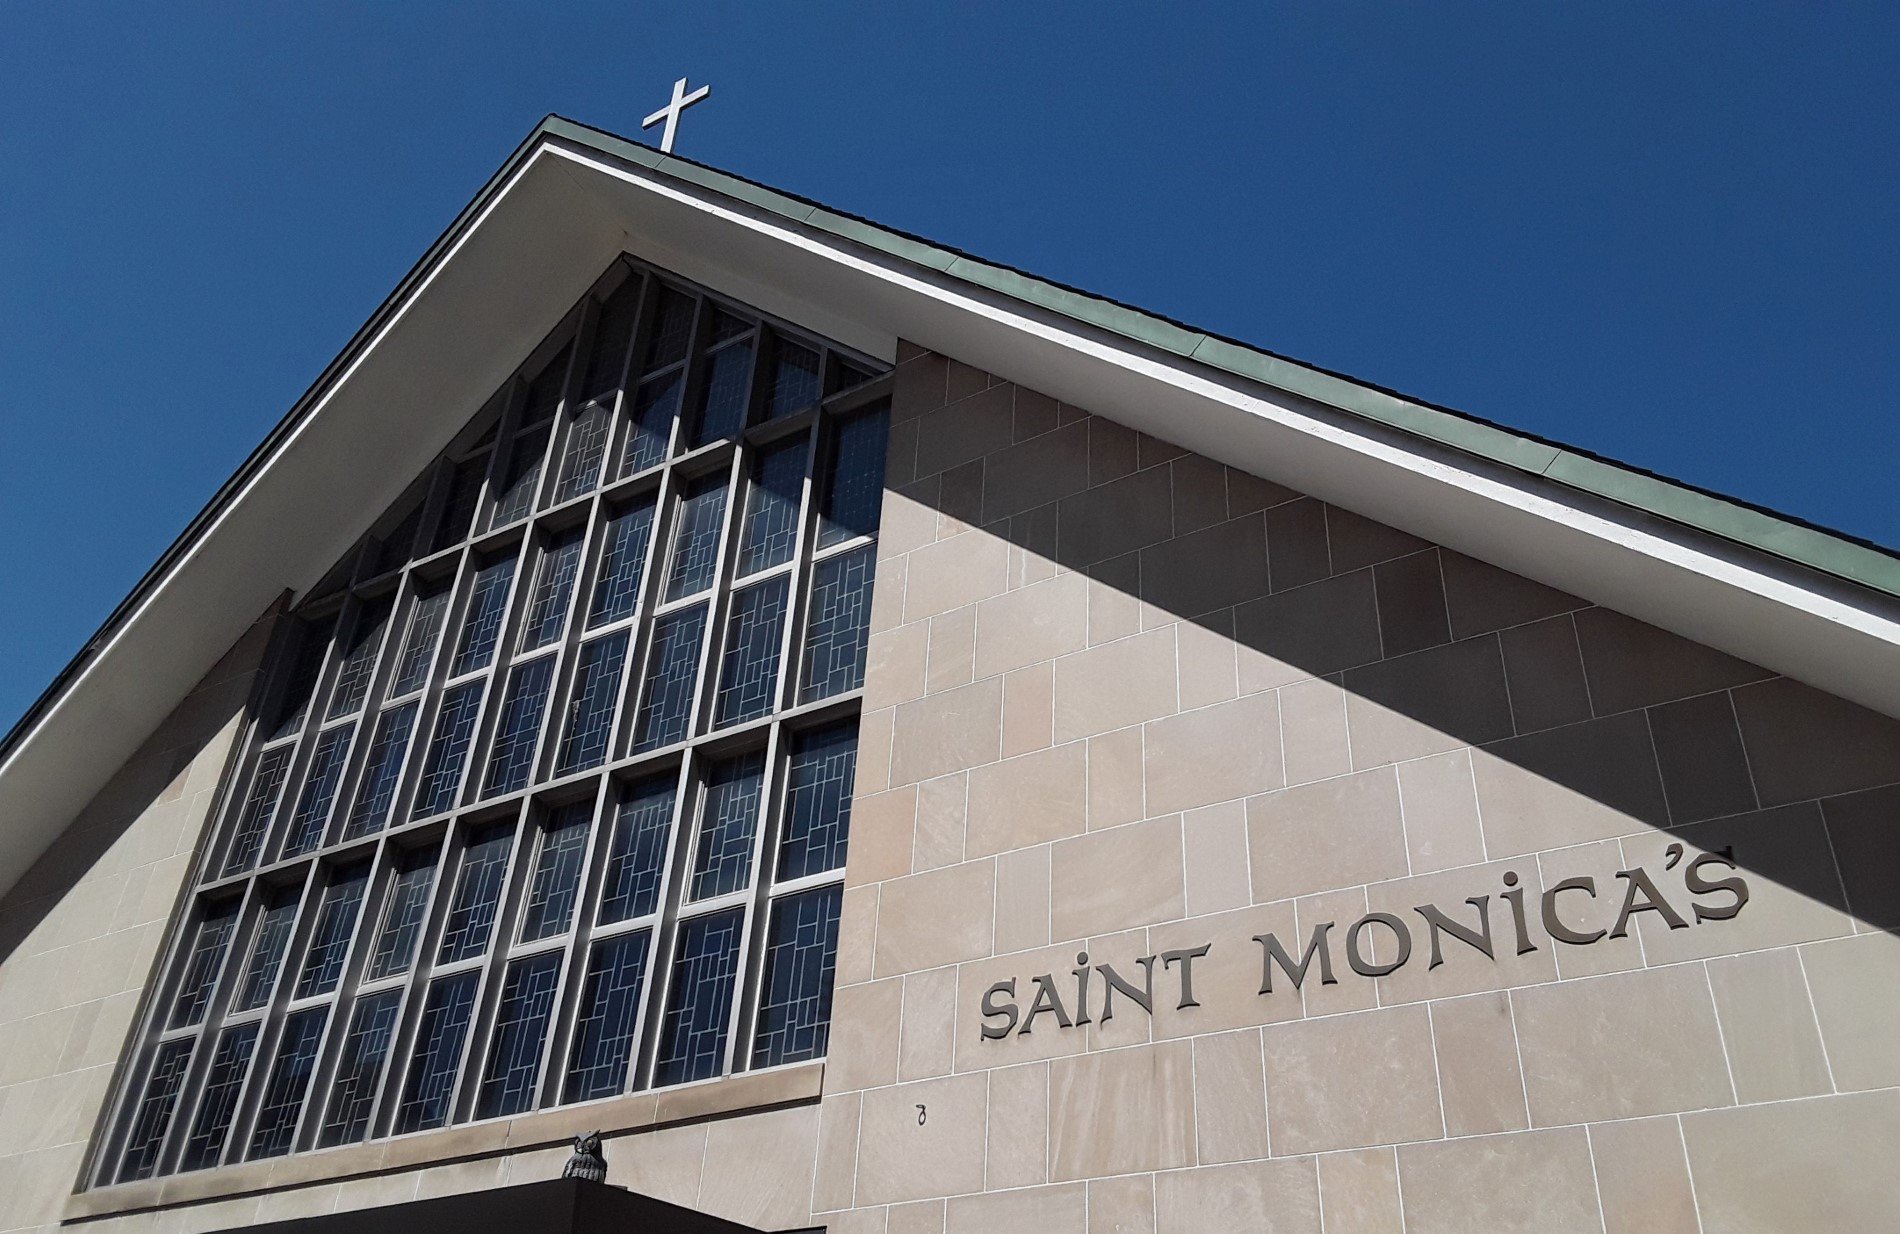 Picture showing words St. Monica's written on front of church, stained glass window, and cross on roof